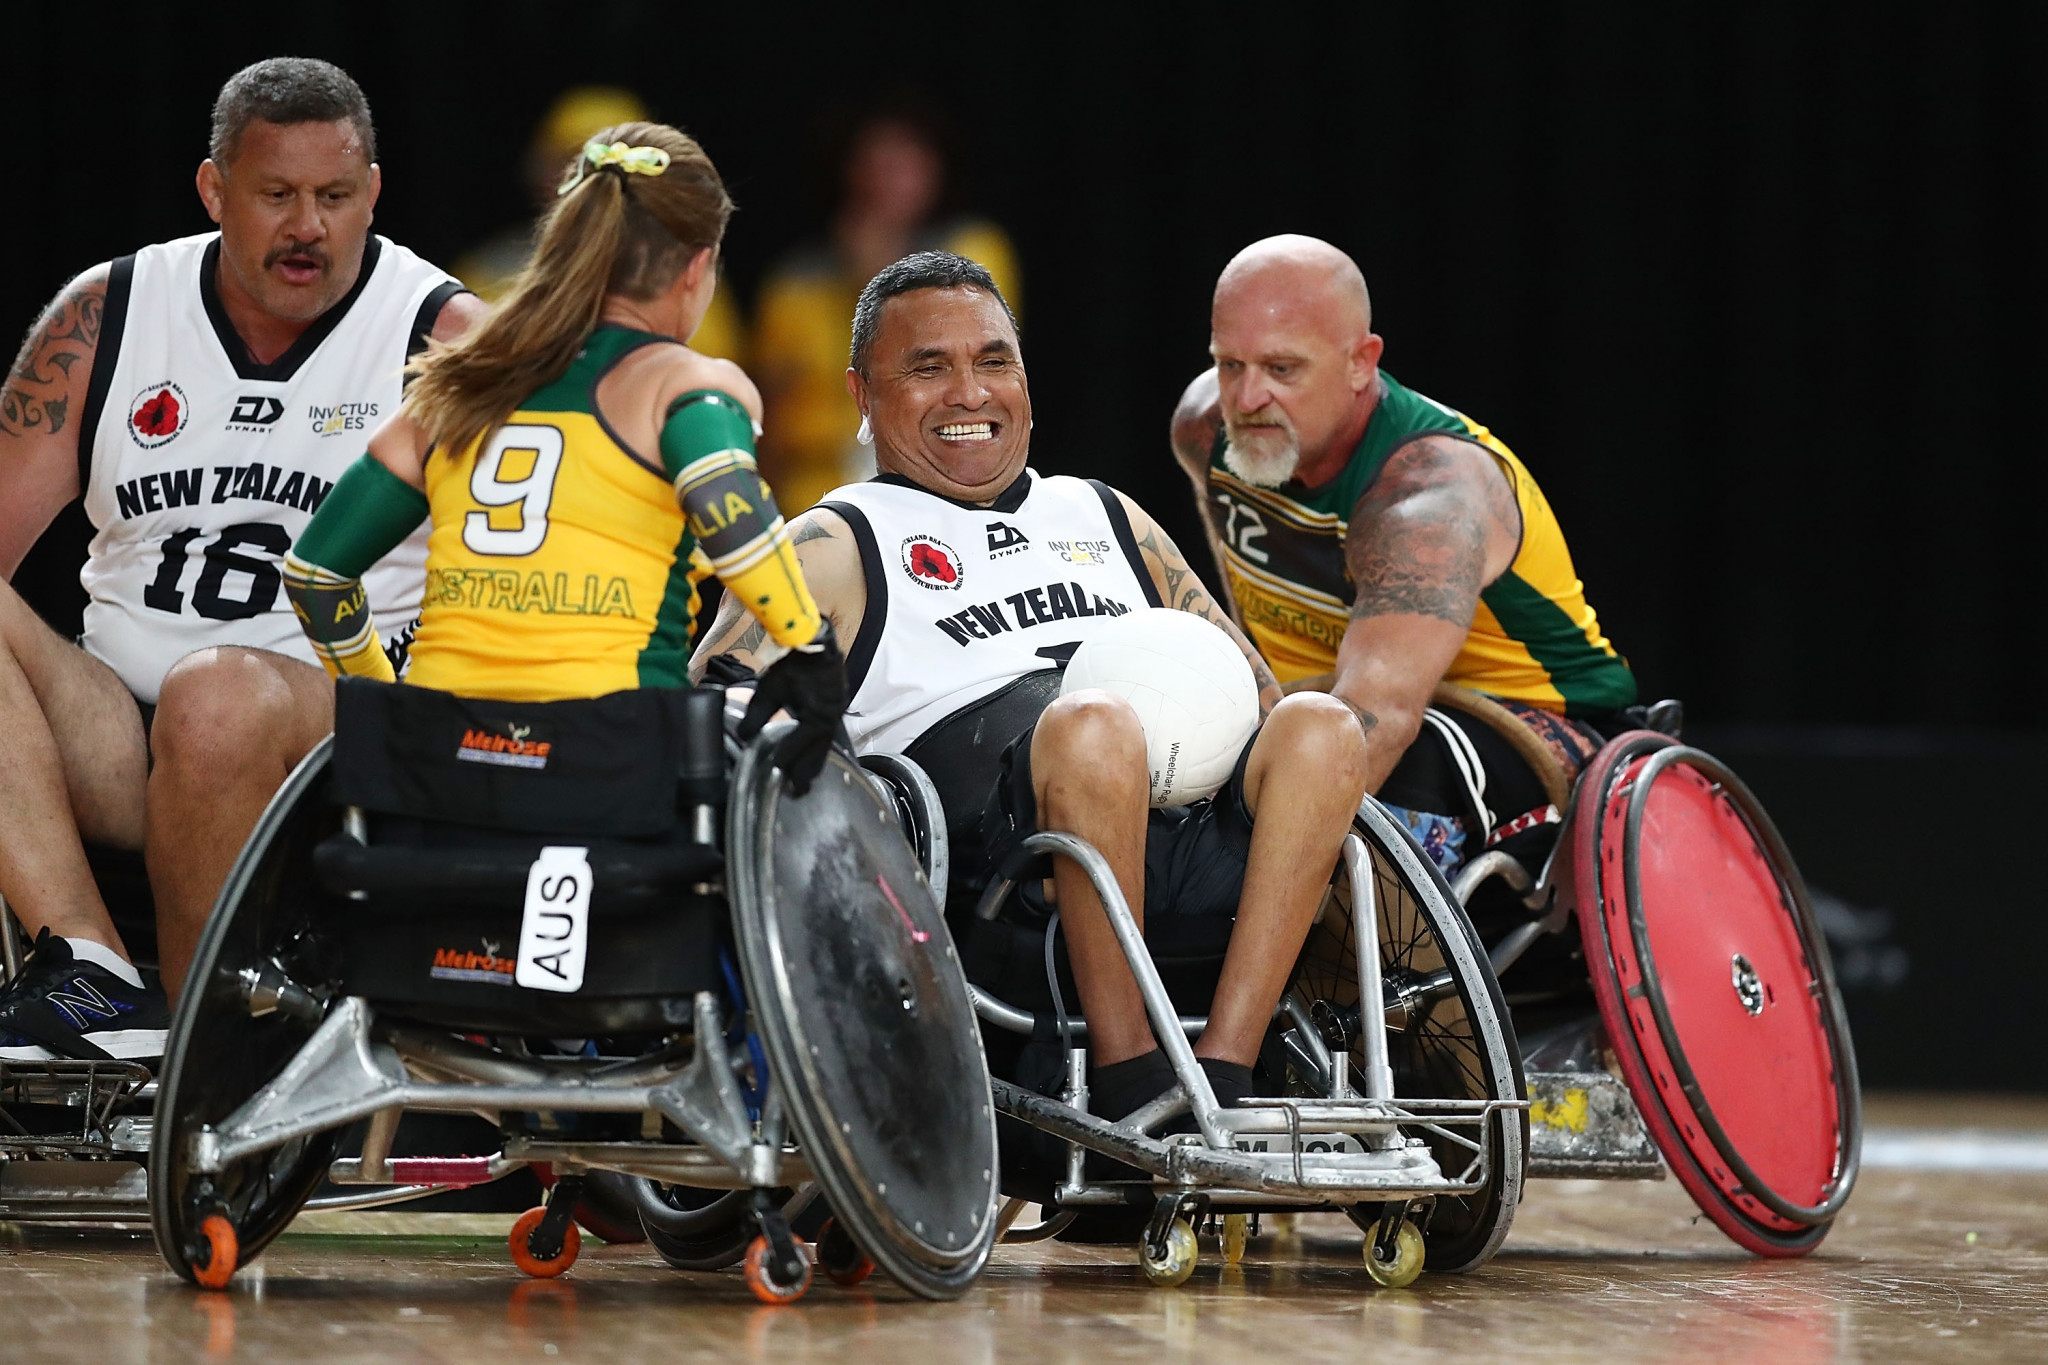 Wheelchair rugby to make World Games debut as invitational sports confirmed 